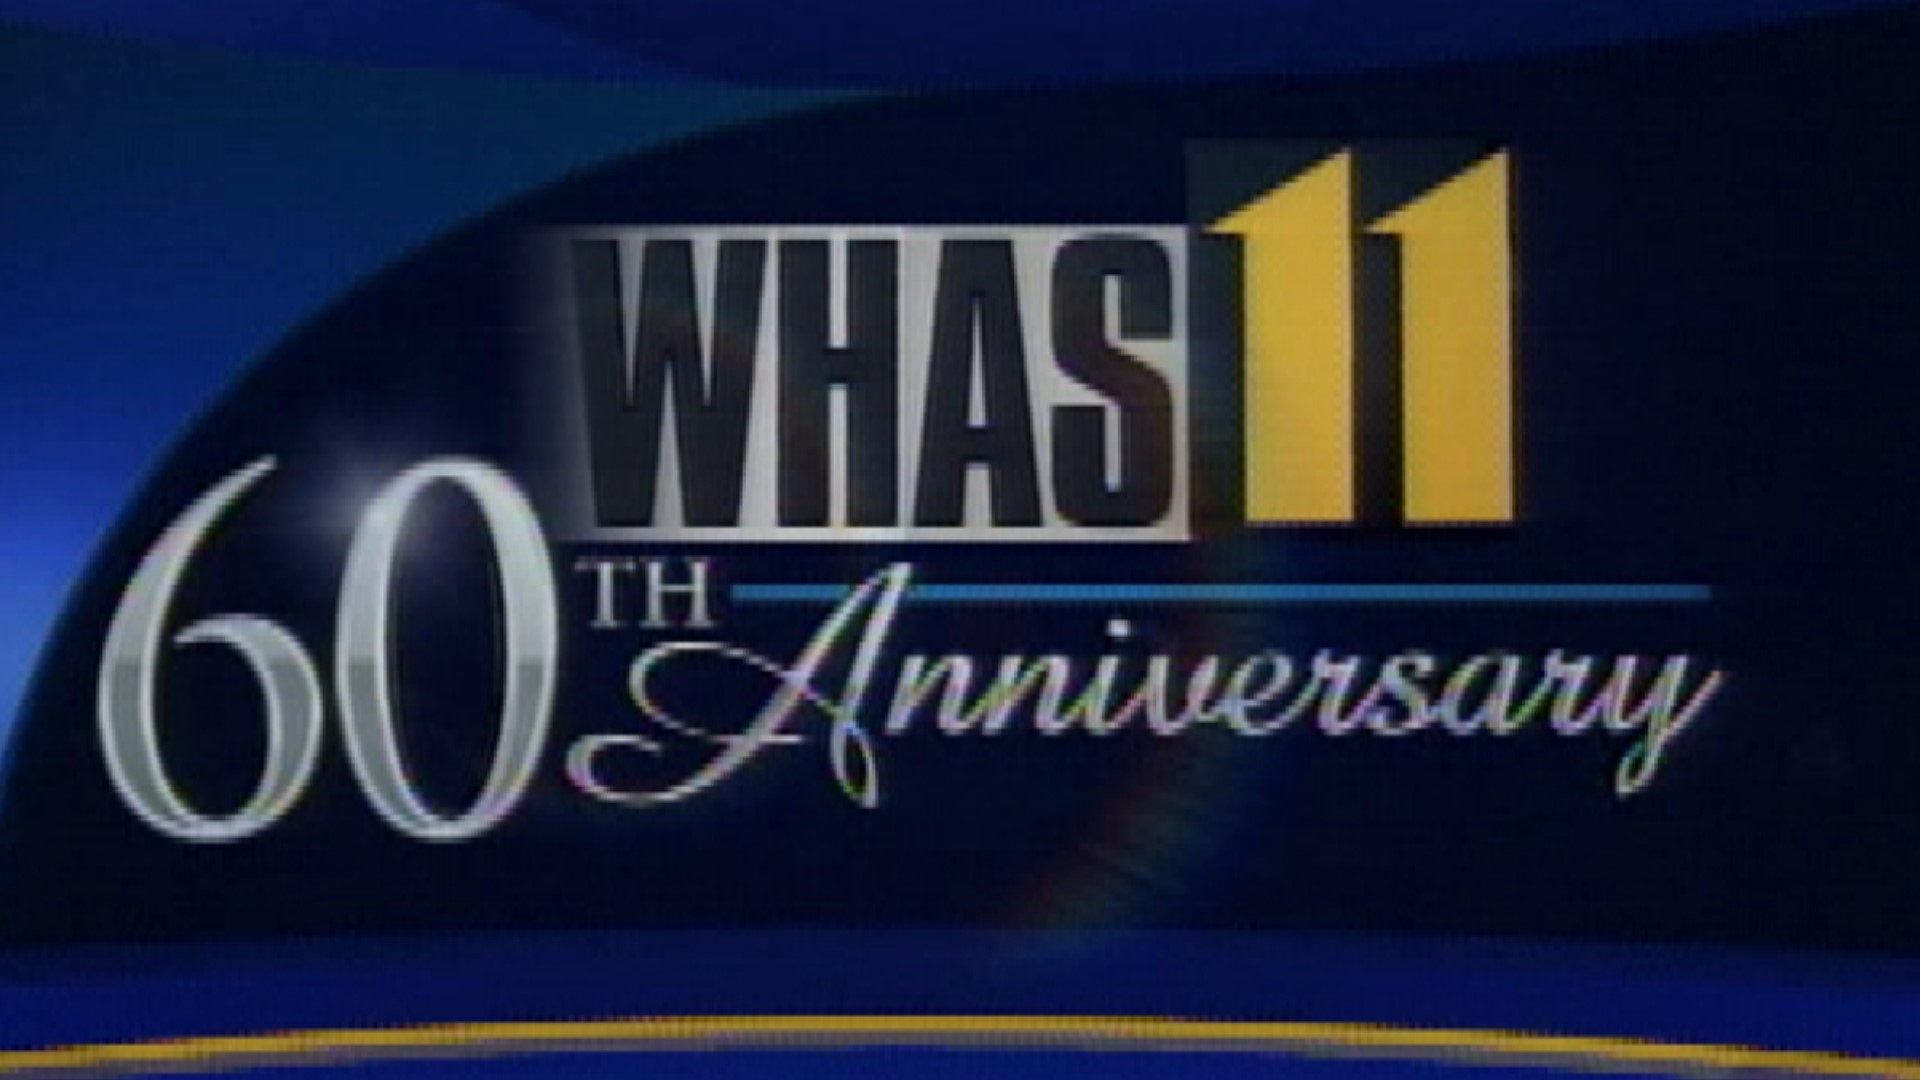 WHAS11 signed on the air on March 27, 1950. In 2010 we produced a special 60th anniversary special celebrating our significant milestone.